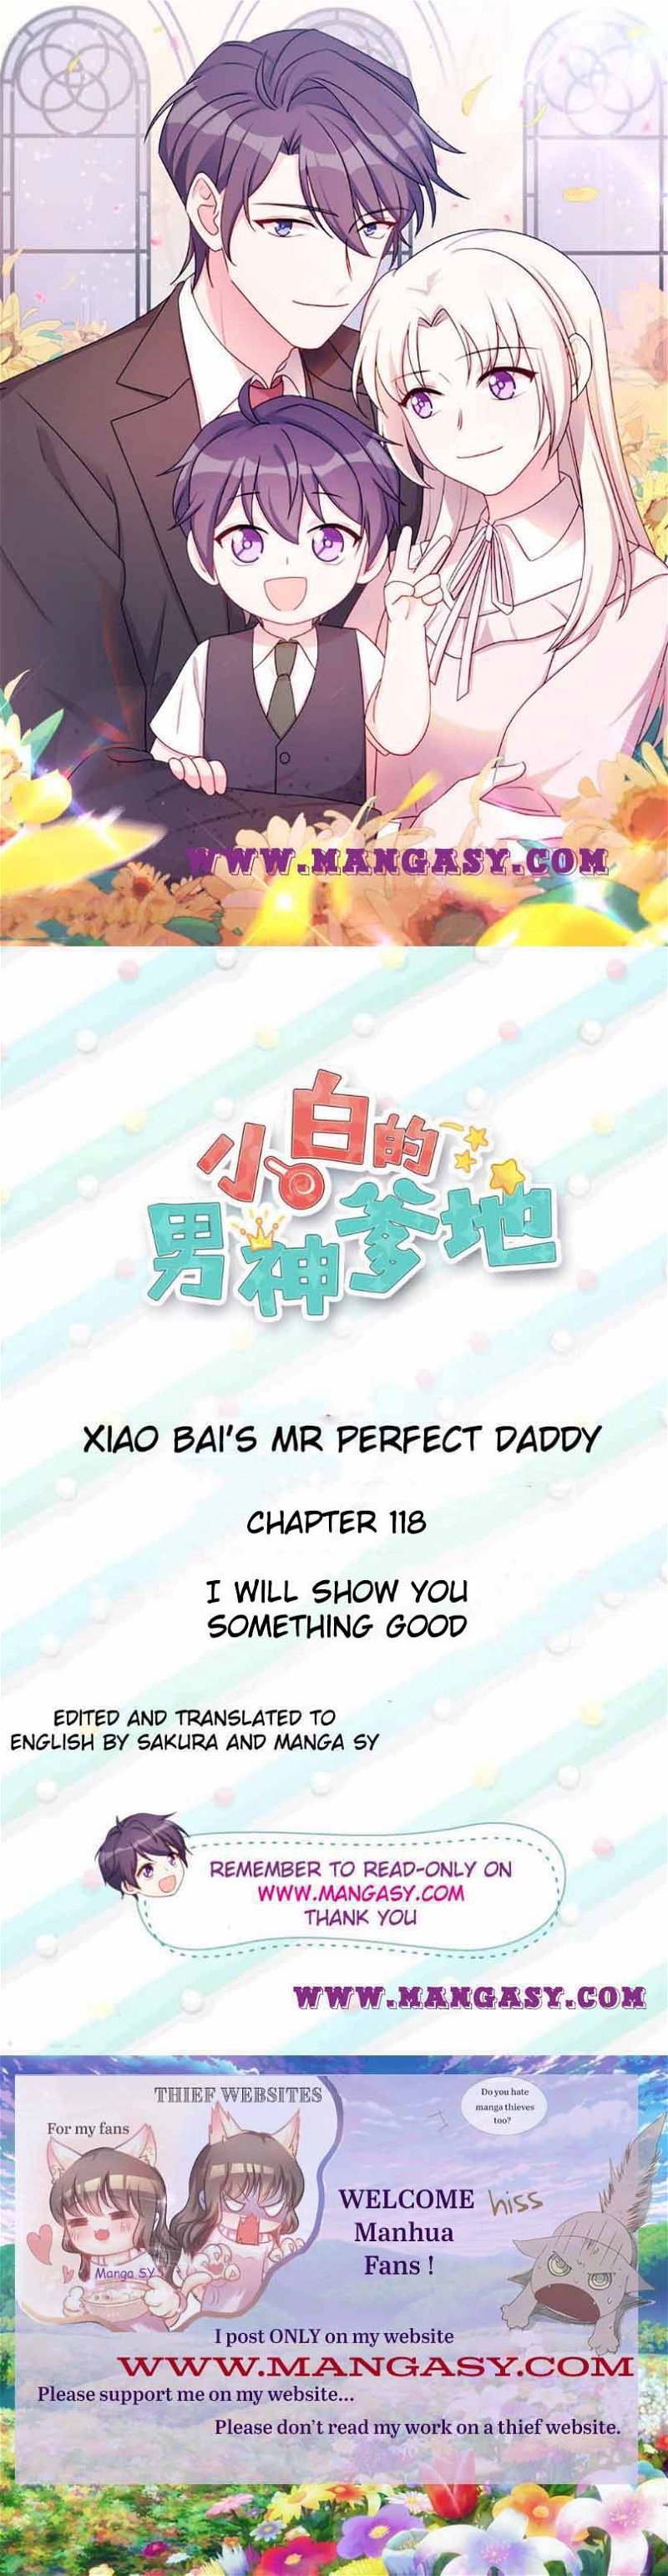 Xiao Bai’s father is a wonderful person Chapter 118 - Page 0